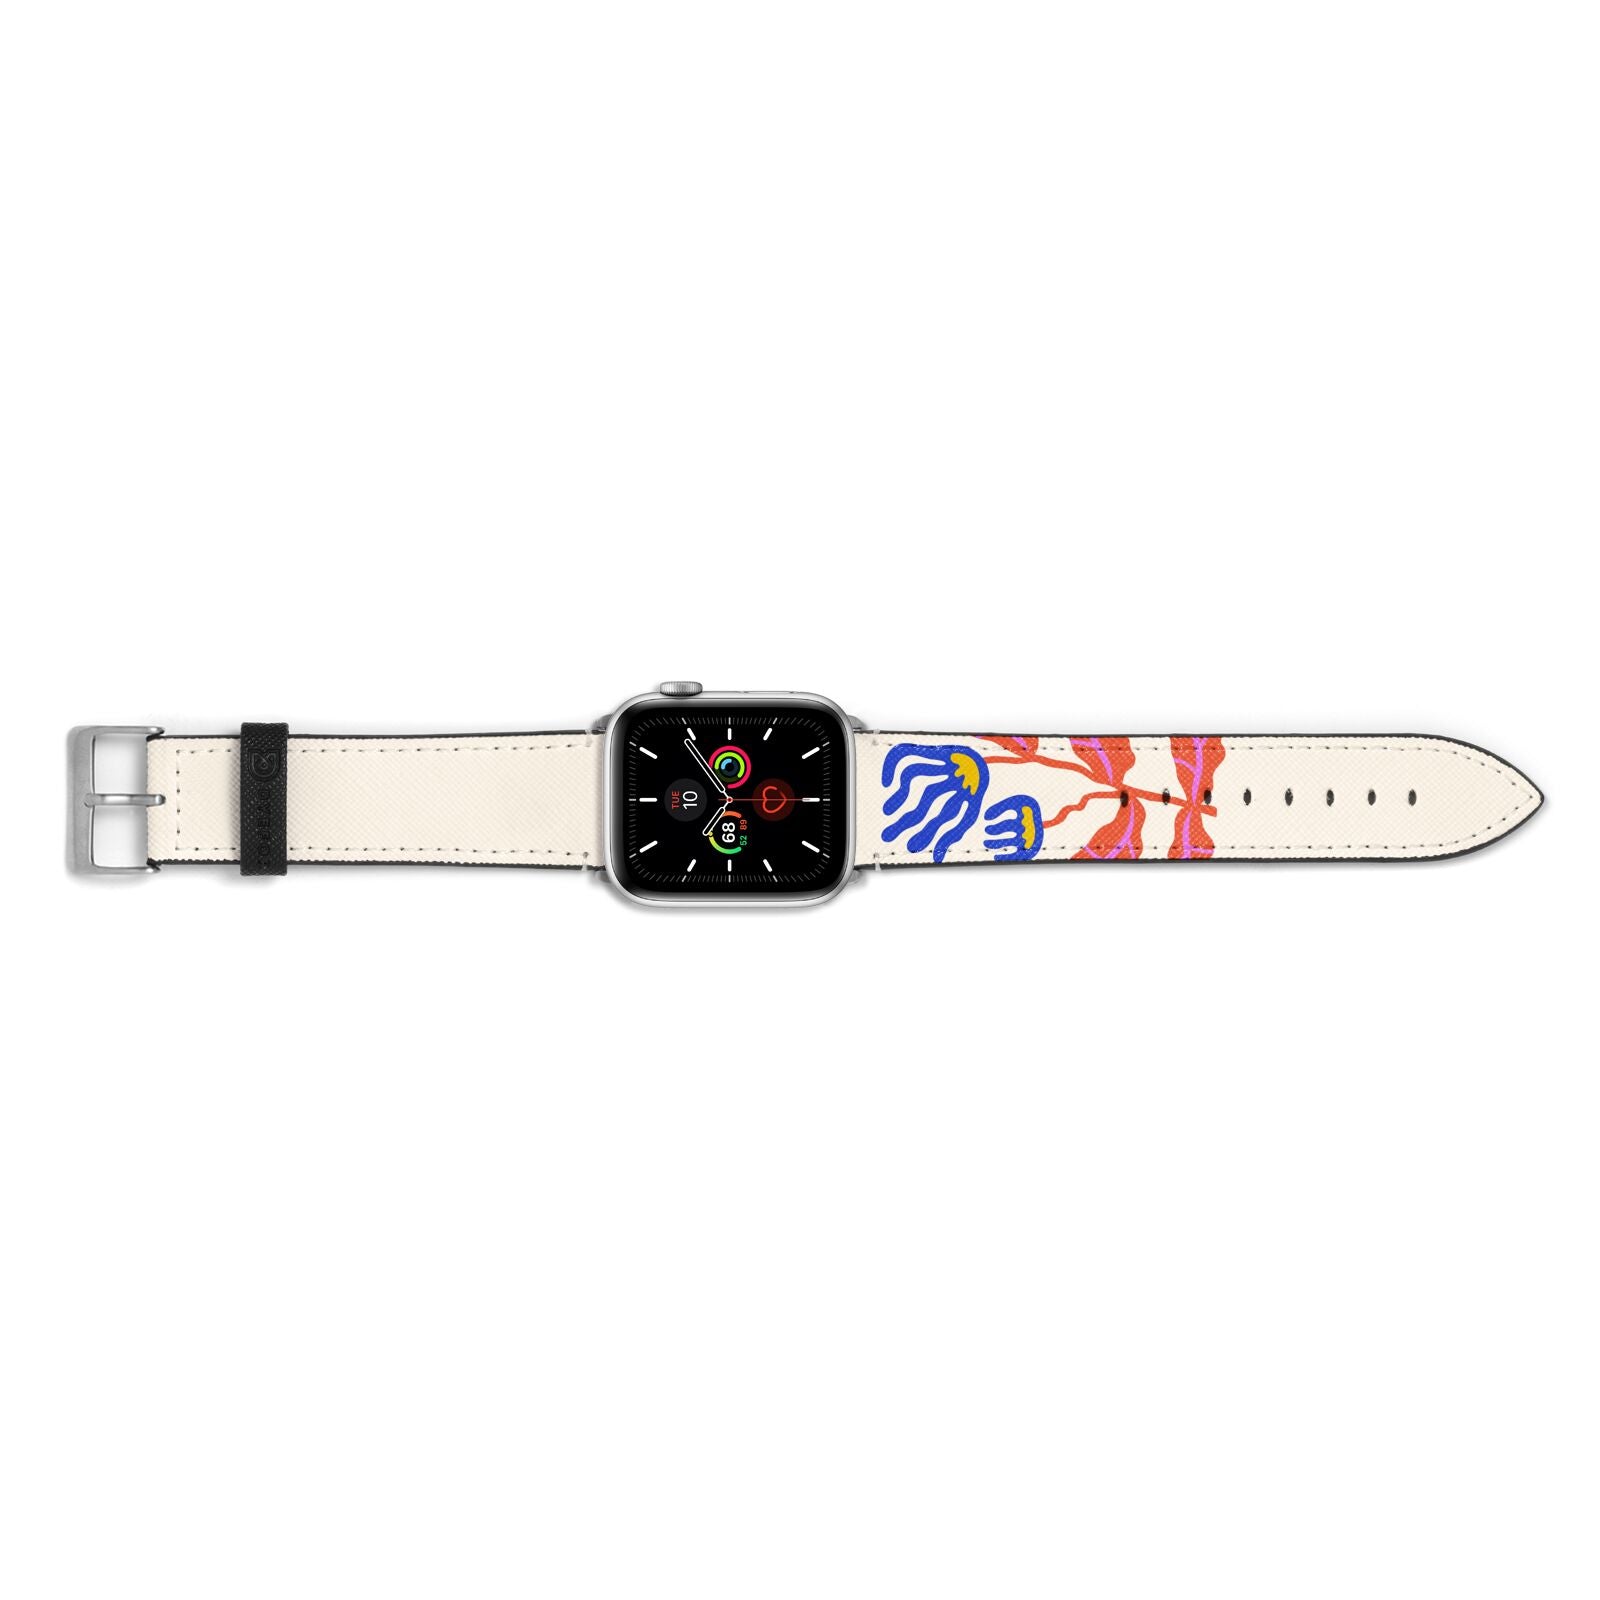 Contemporary Floral Apple Watch Strap Landscape Image Silver Hardware